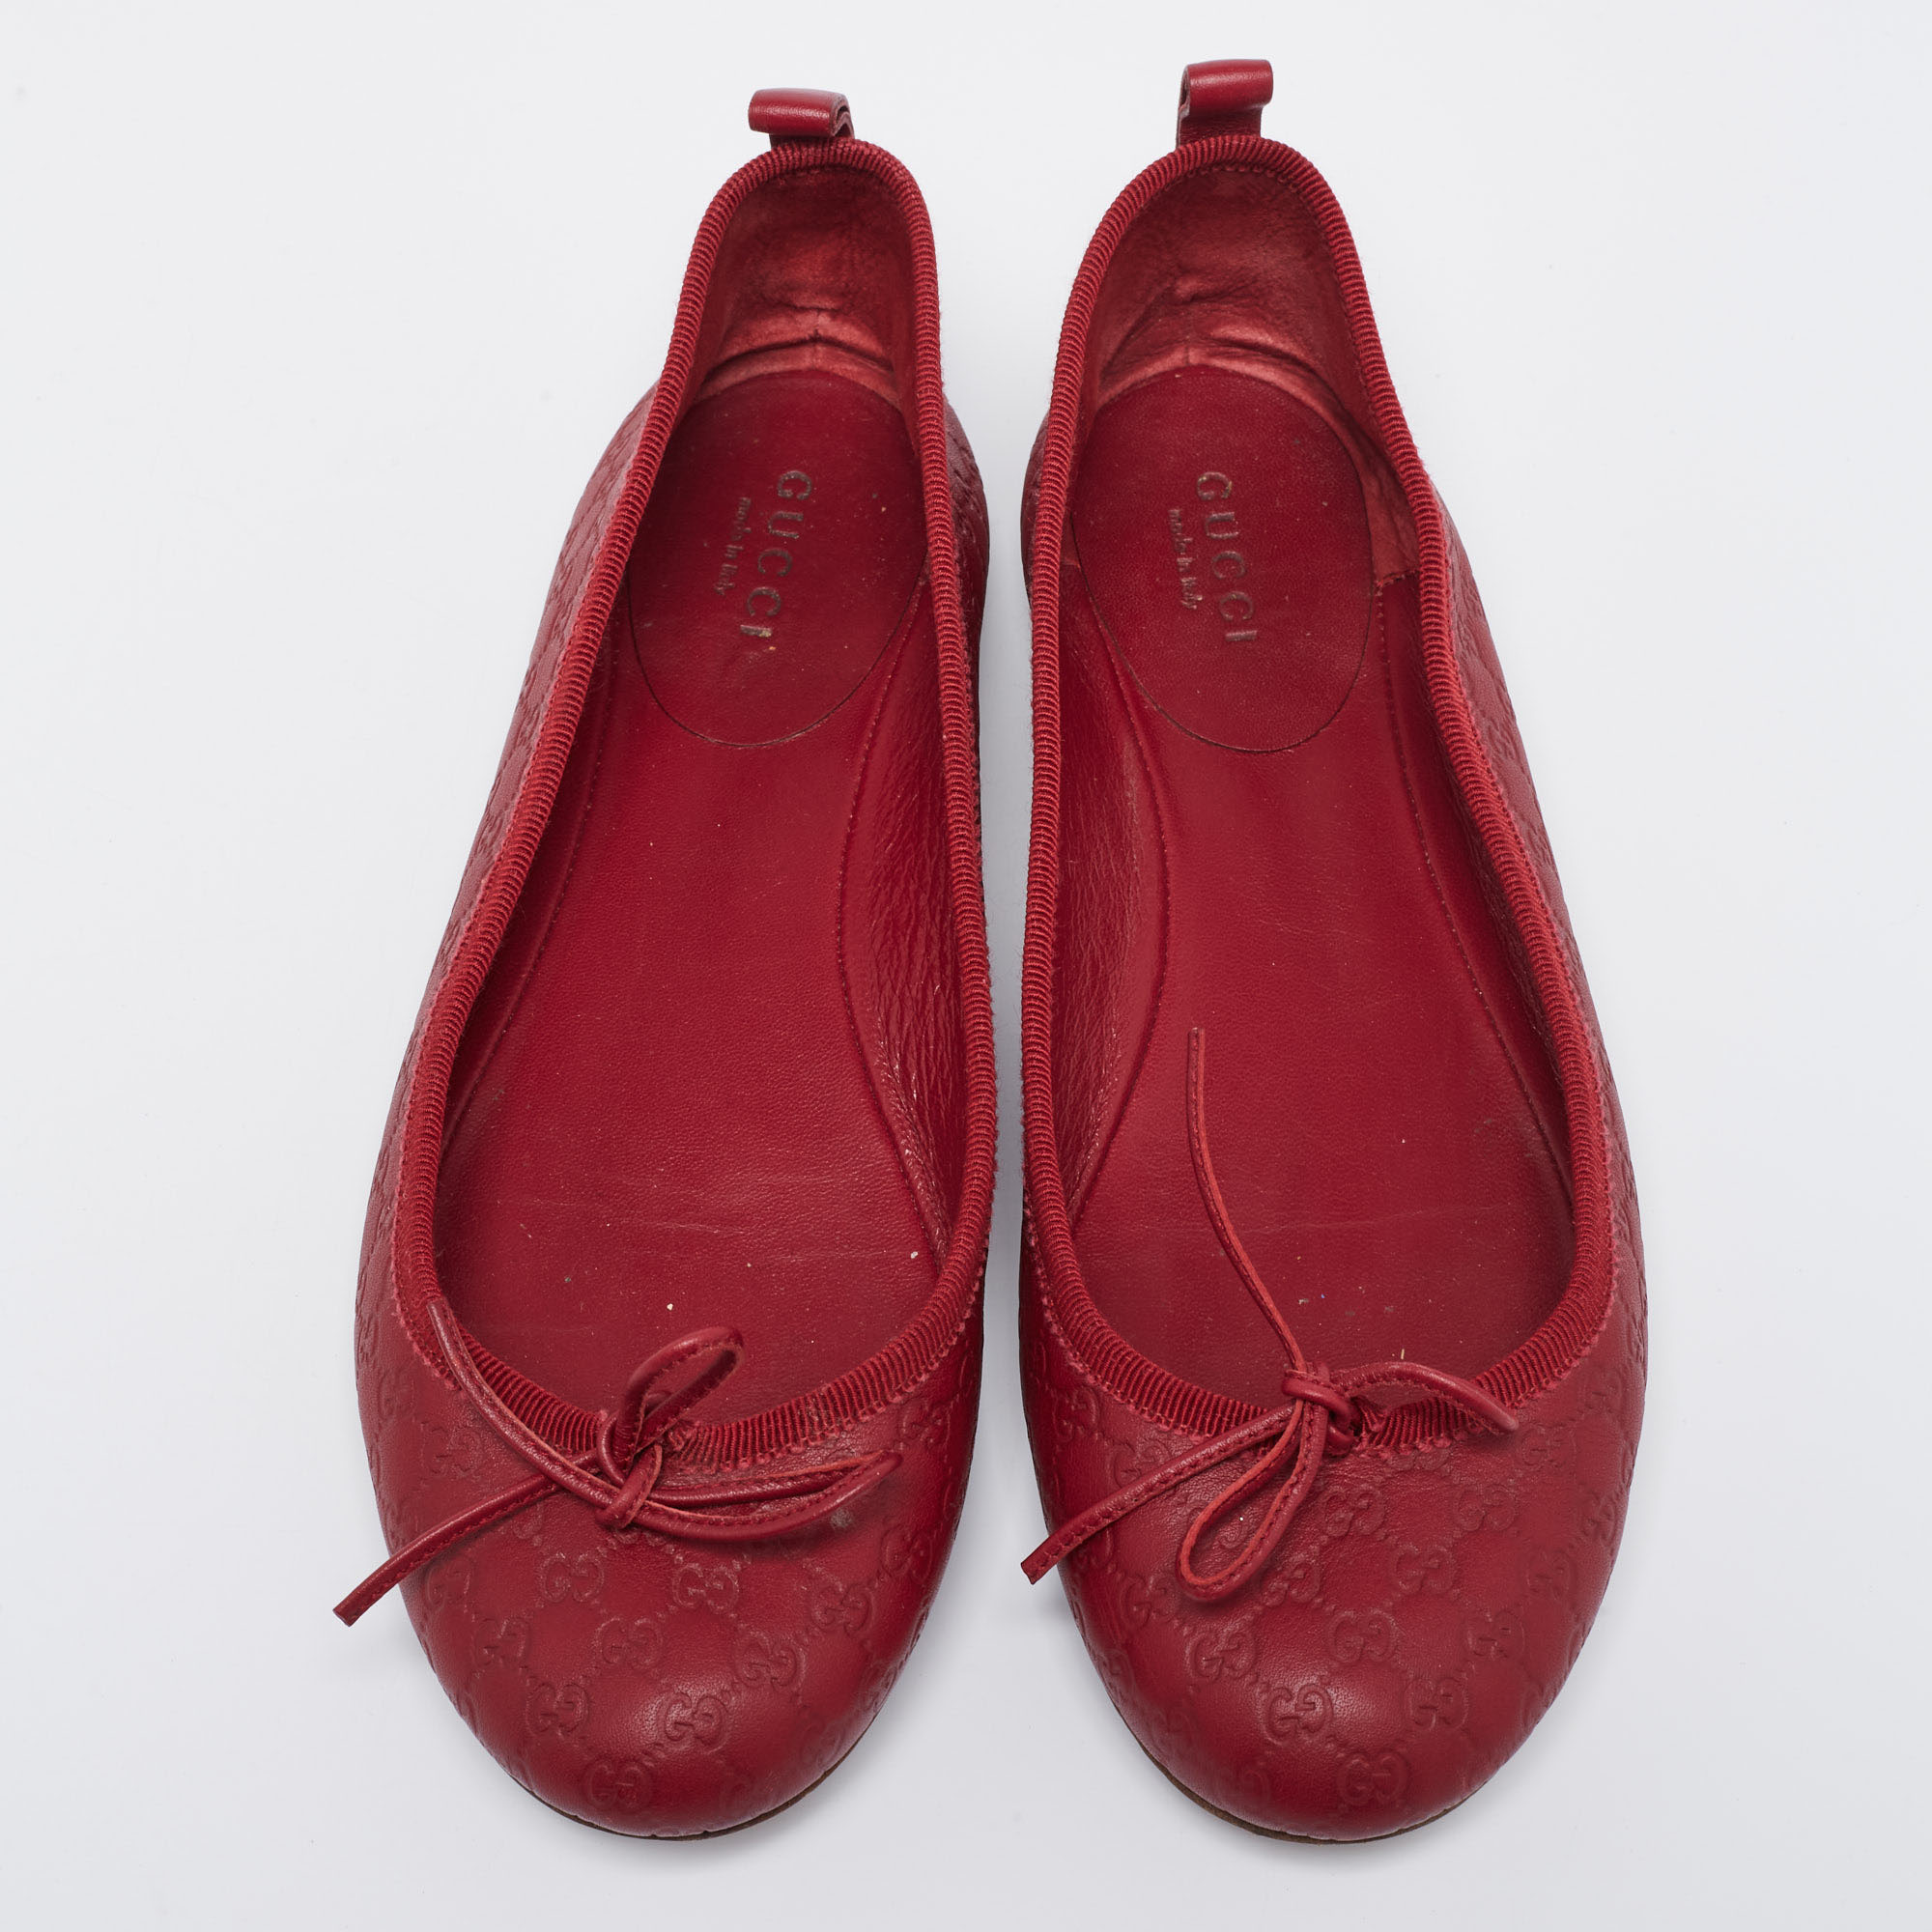 Gucci Red Microguccissima Leather Bow Detail Ballet Flats Size 35.5